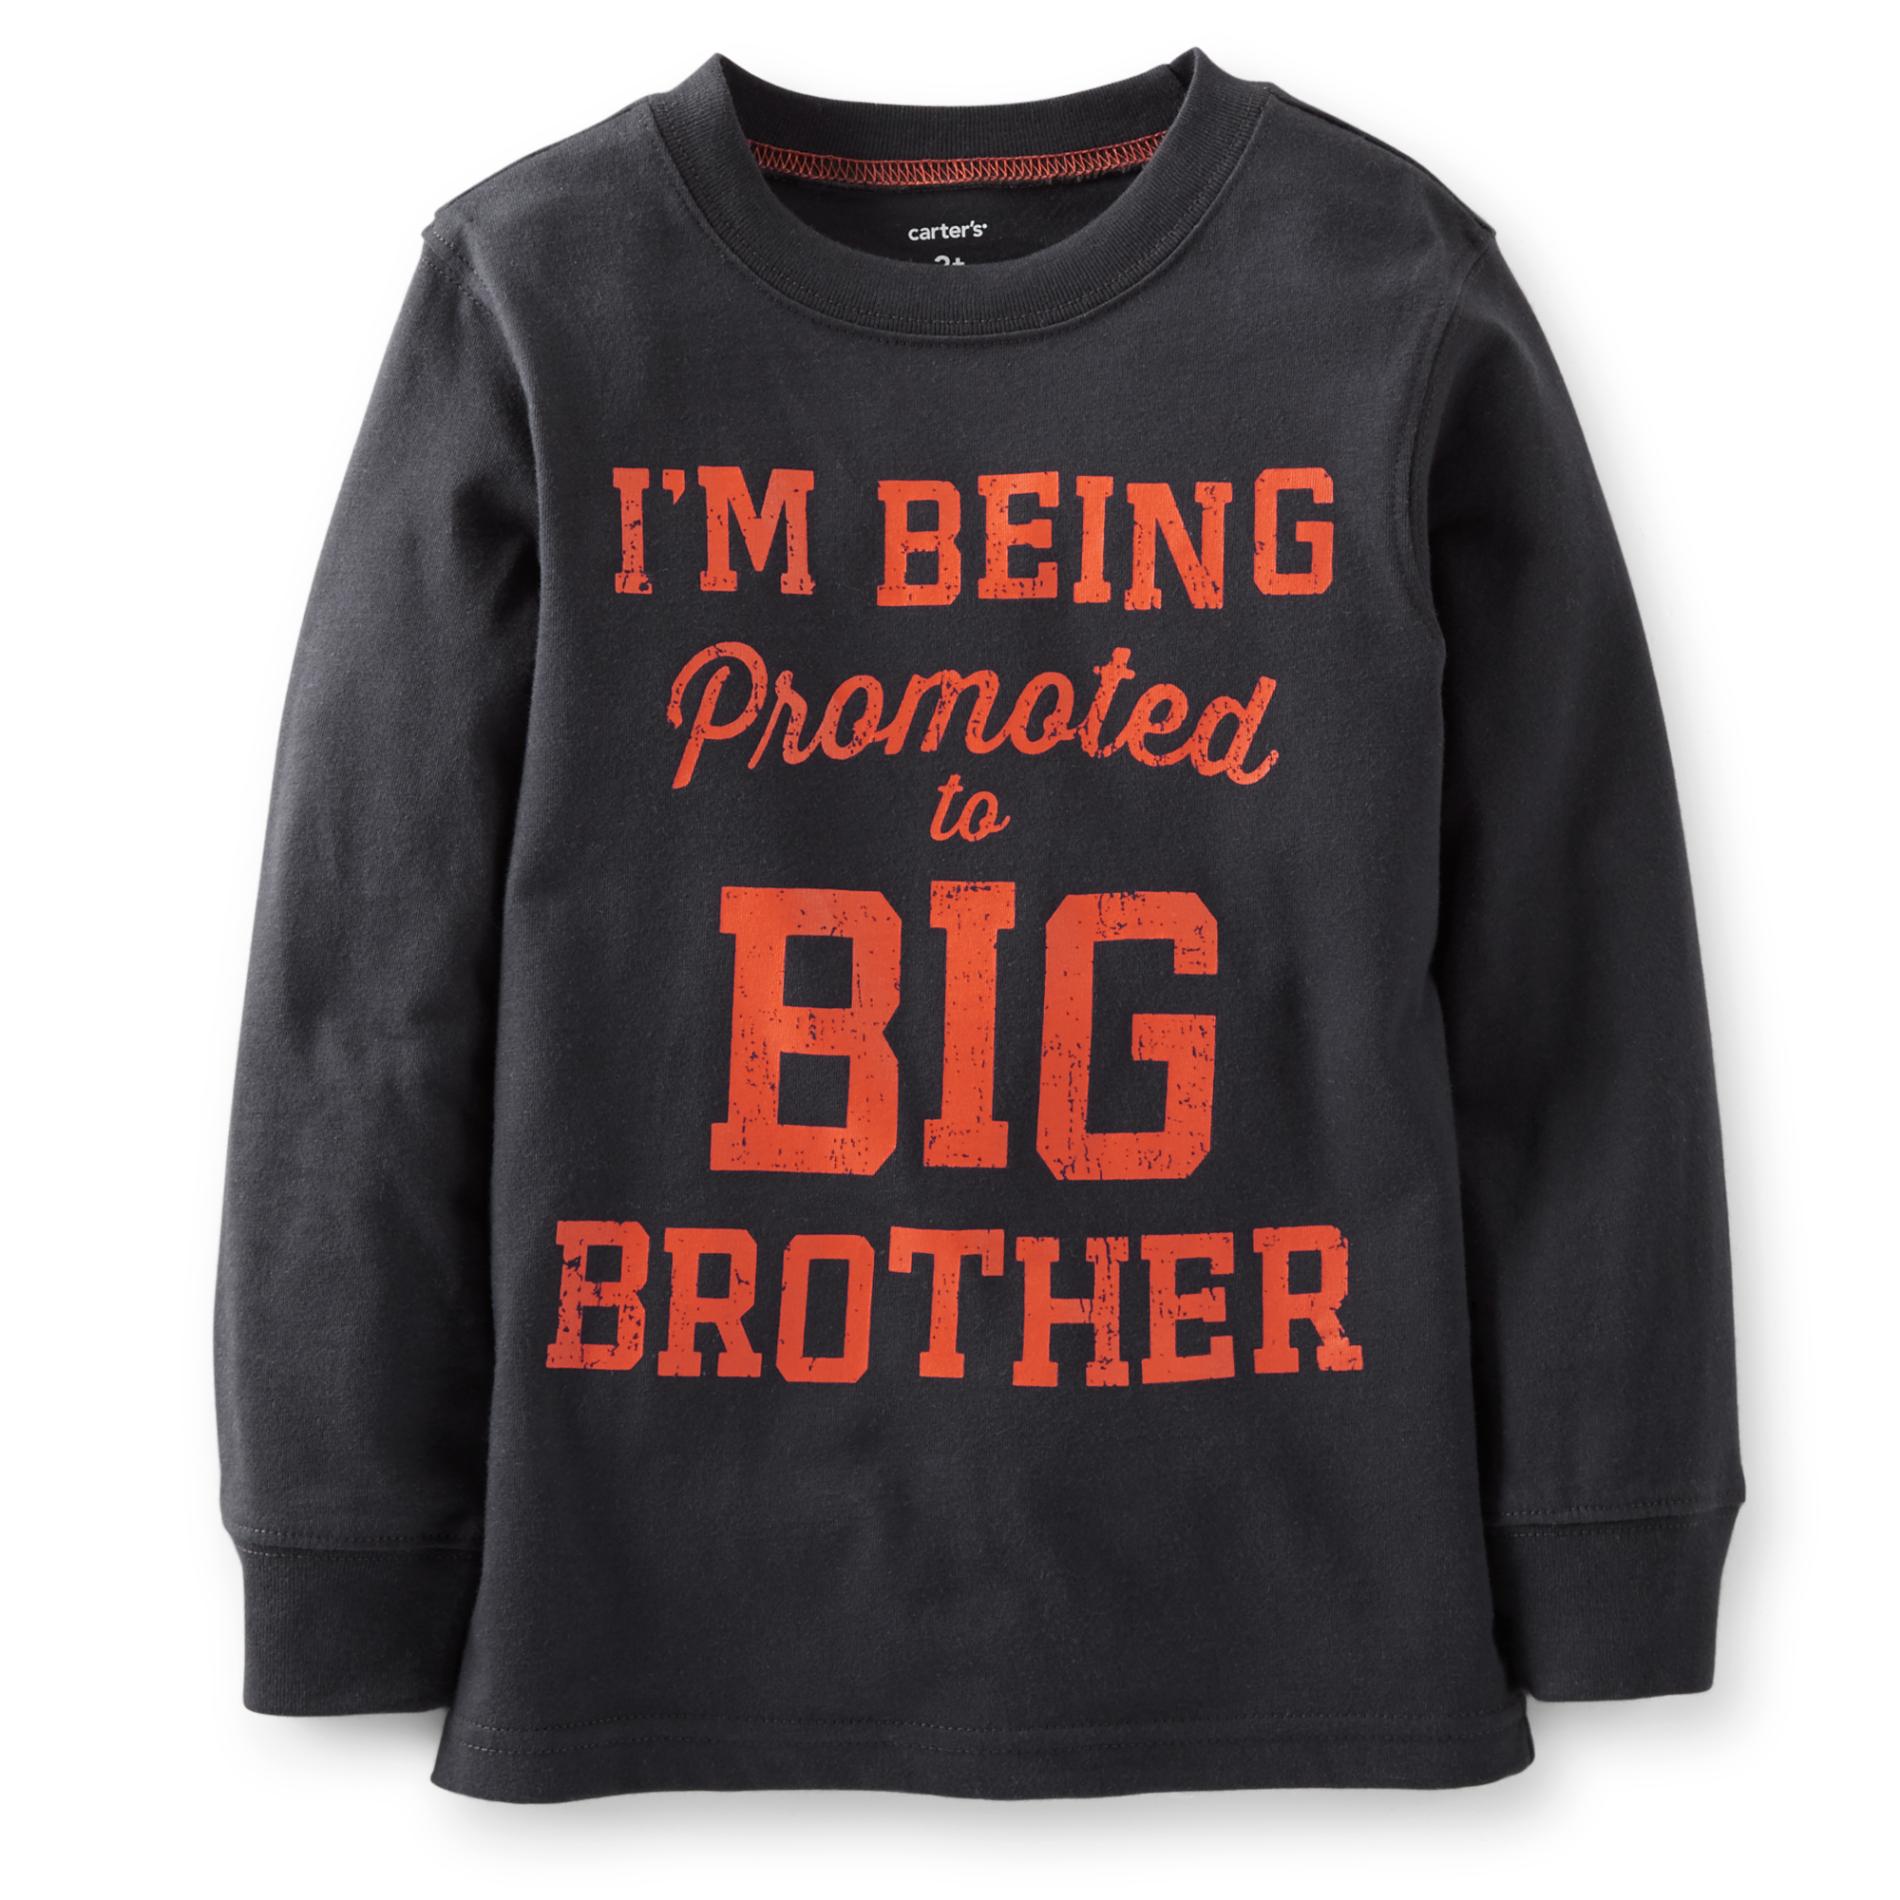 Carter's Toddler Boy's Sweatshirt - Promoted To Big Brother